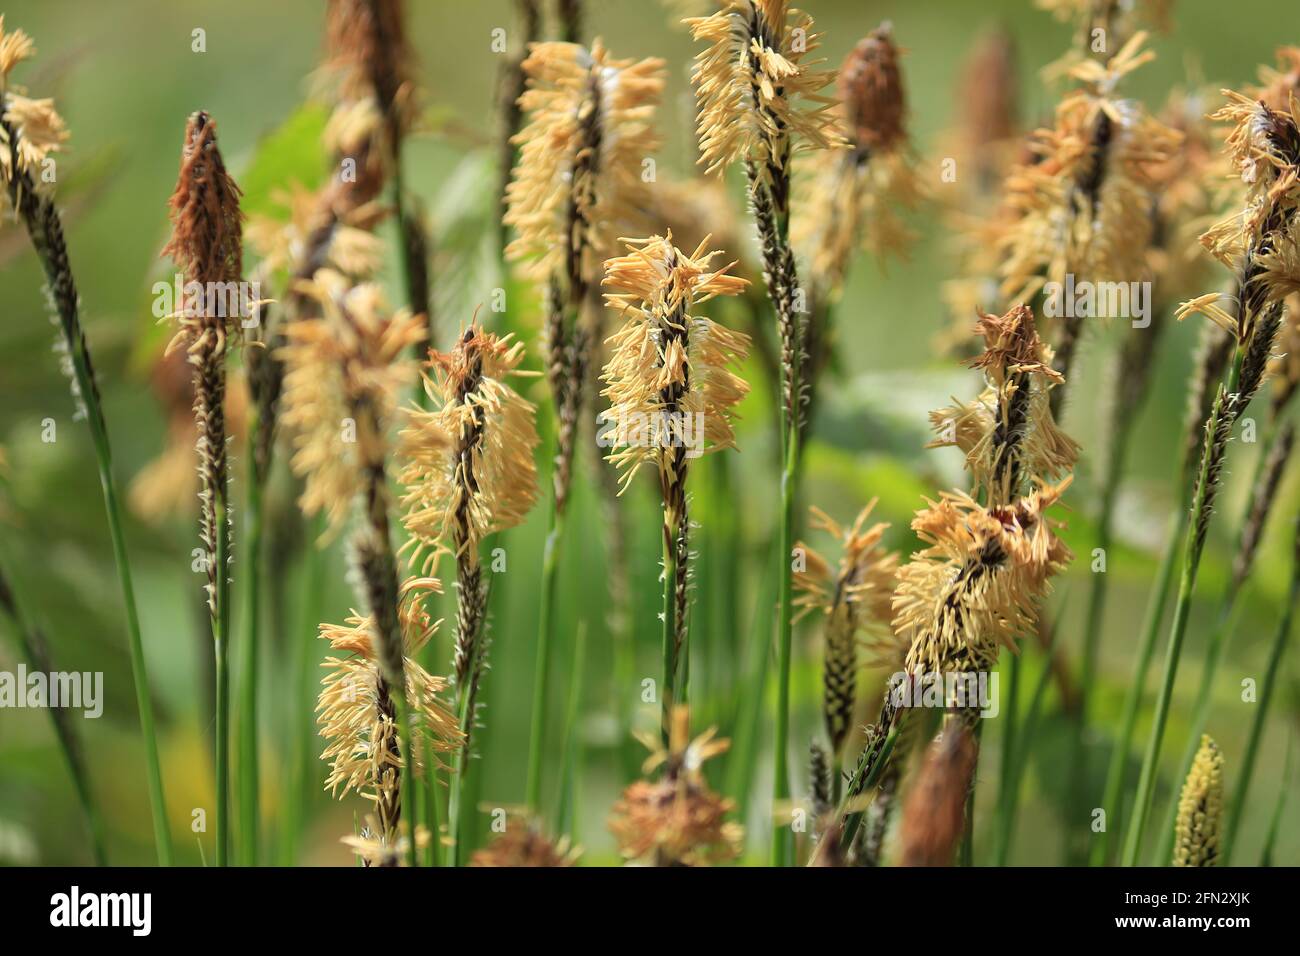 Carex ericetorum, Rare Spring-sedge. Spring flower landscape. Yellow blooming spikelets of sedge on a green meadow in sunlight at springtime. Stock Photo